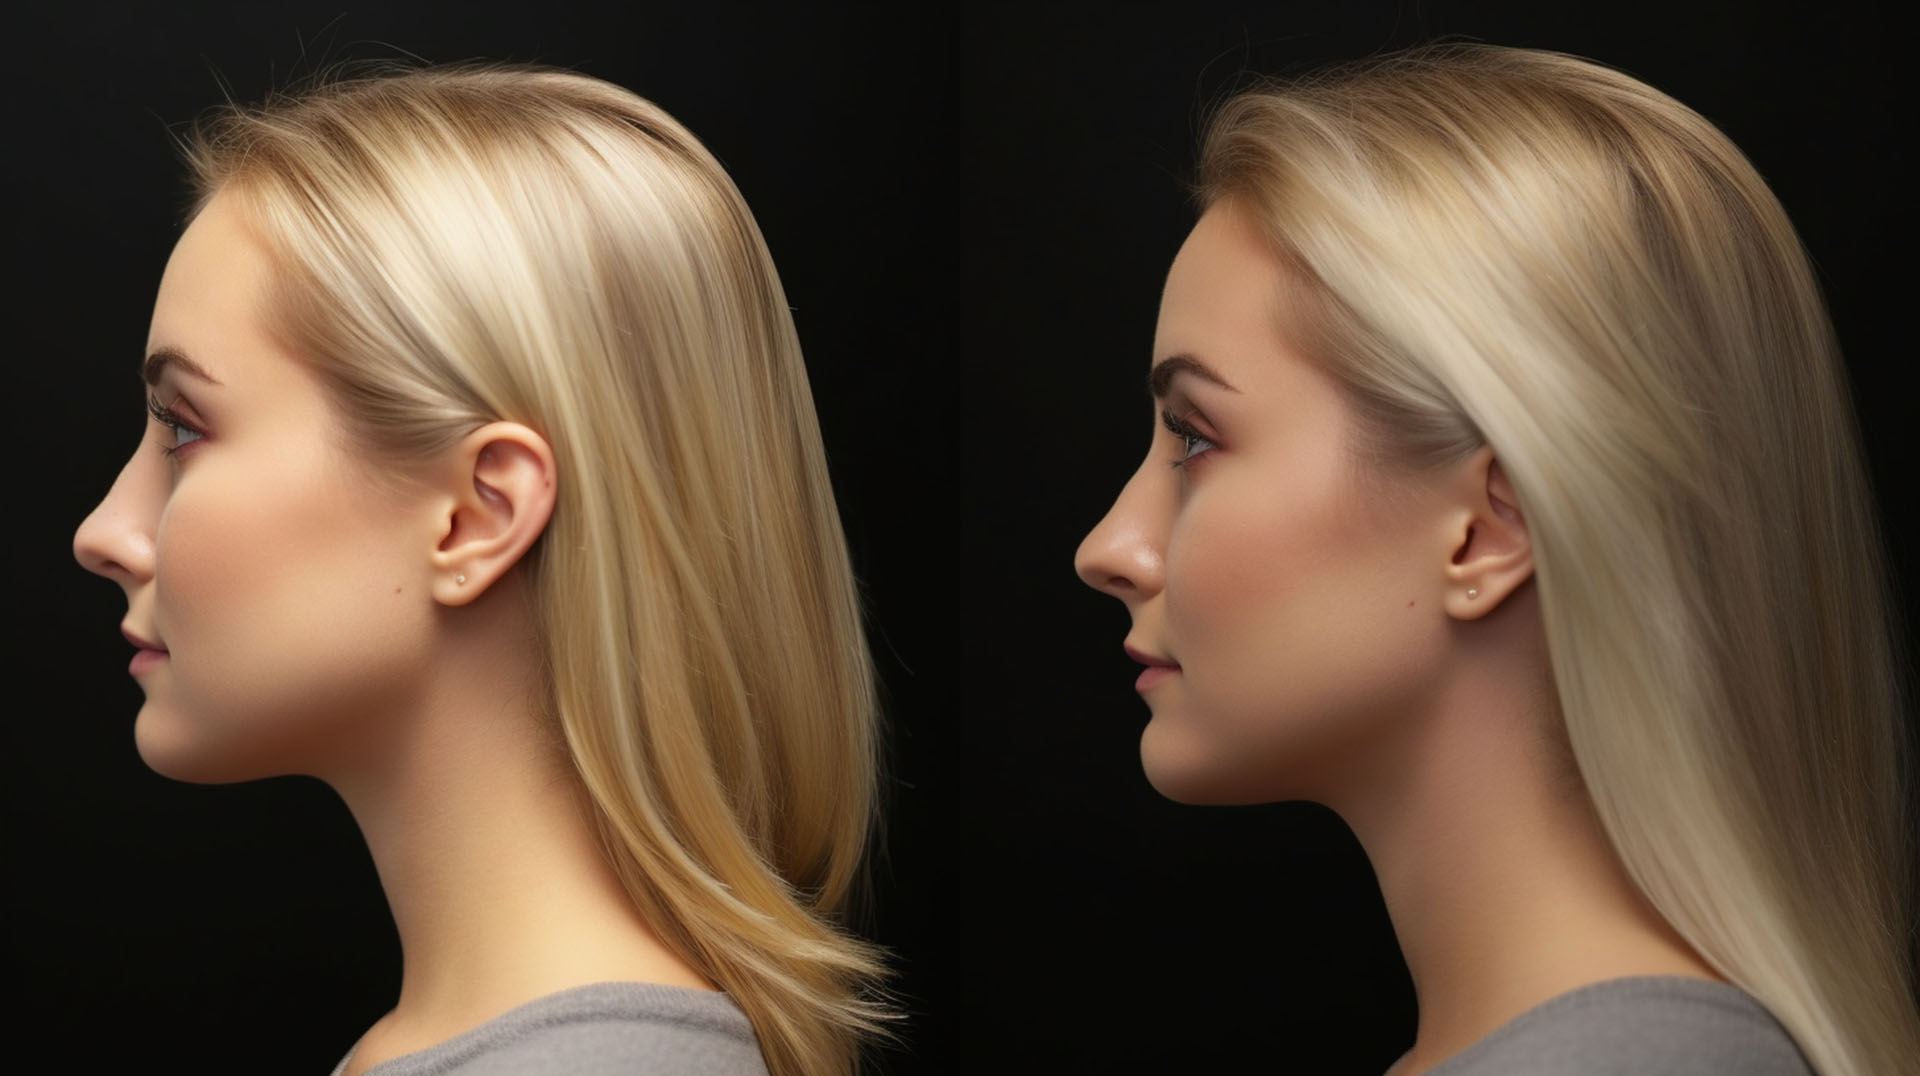 Rhinoplasty Before and After Photo Brantford